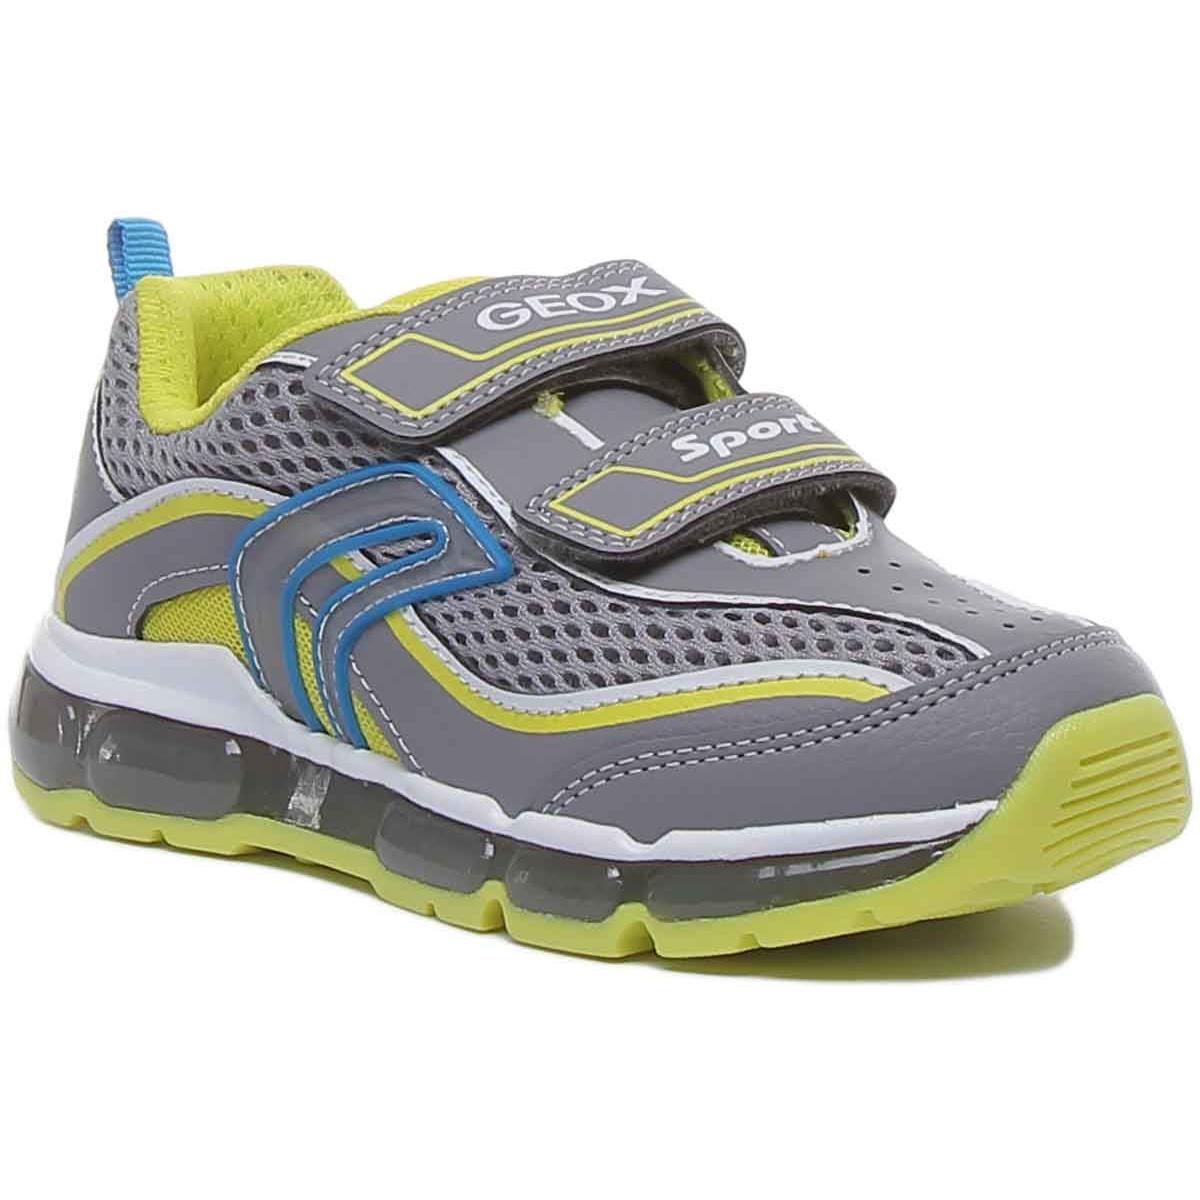 Geox J Android Kids Two Straps Light Up Sneakers In Navy Blue Size US 8 - 4 GREY LIME